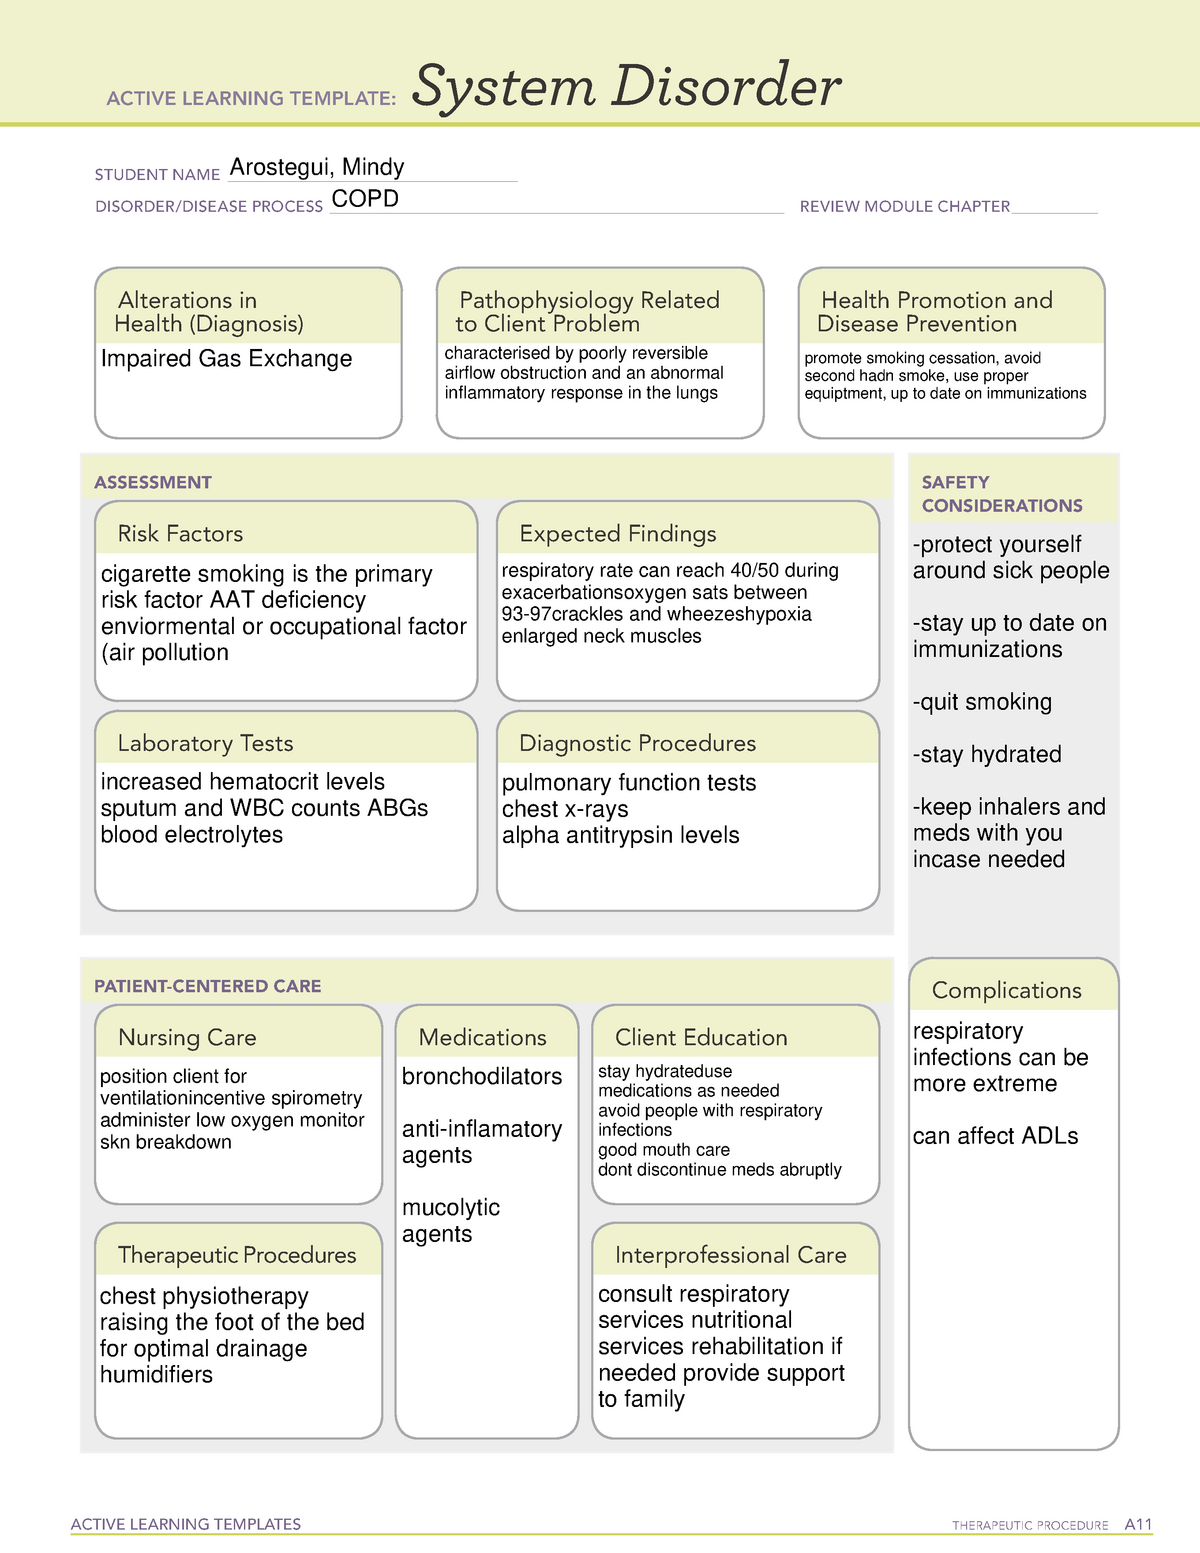 system-disorder-copd-ati-med-card-active-learning-templates-therapeutic-procedure-a-system